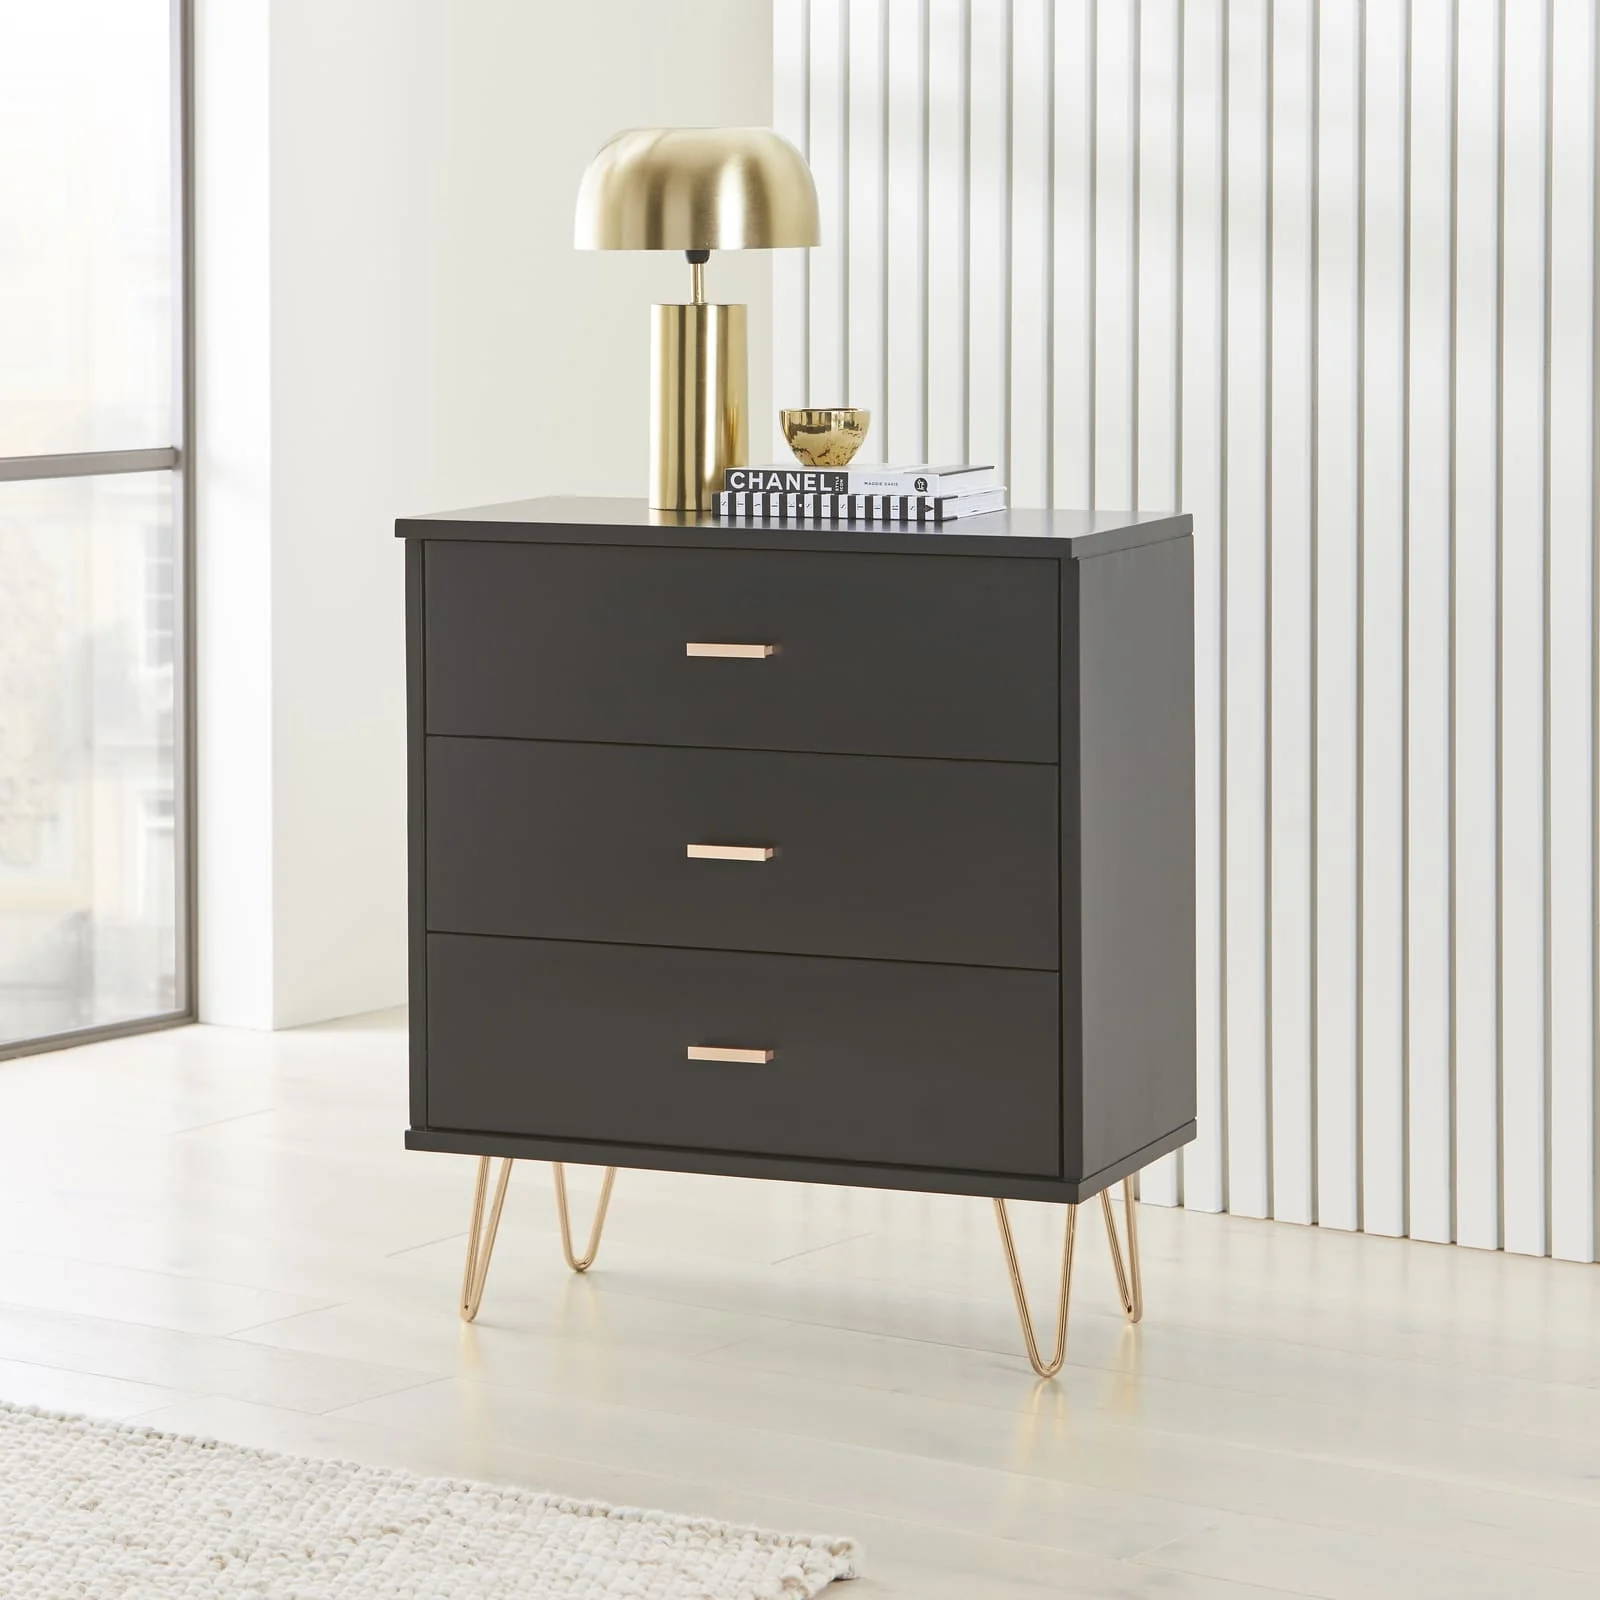 Monroe solid wood painted chest of drawers | malletandplane.com